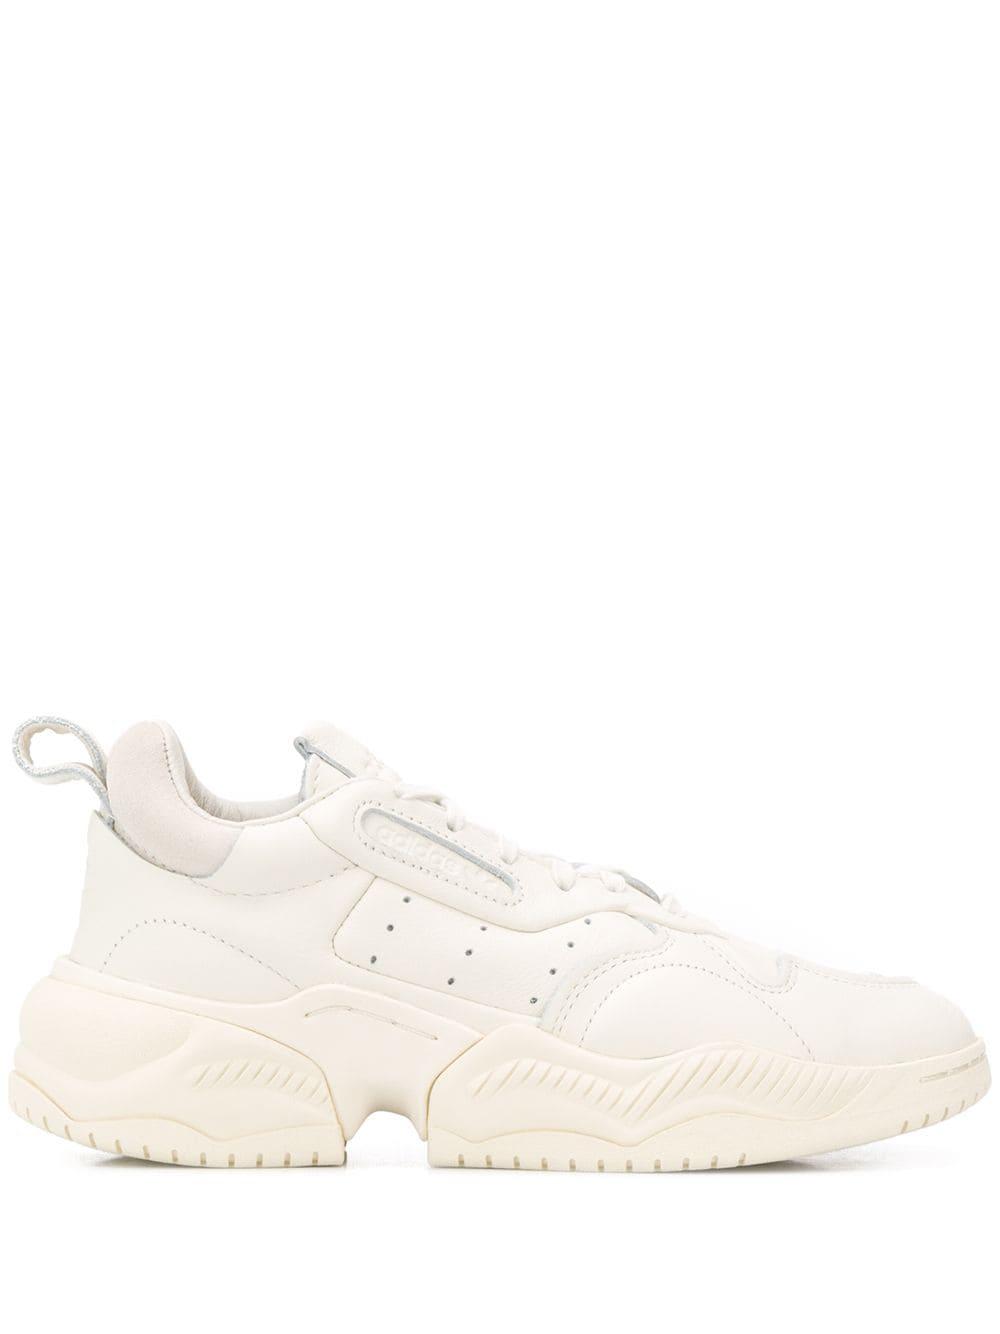 adidas Leather Chunky Sole Sneakers in White | Lyst عدسات انستازيا